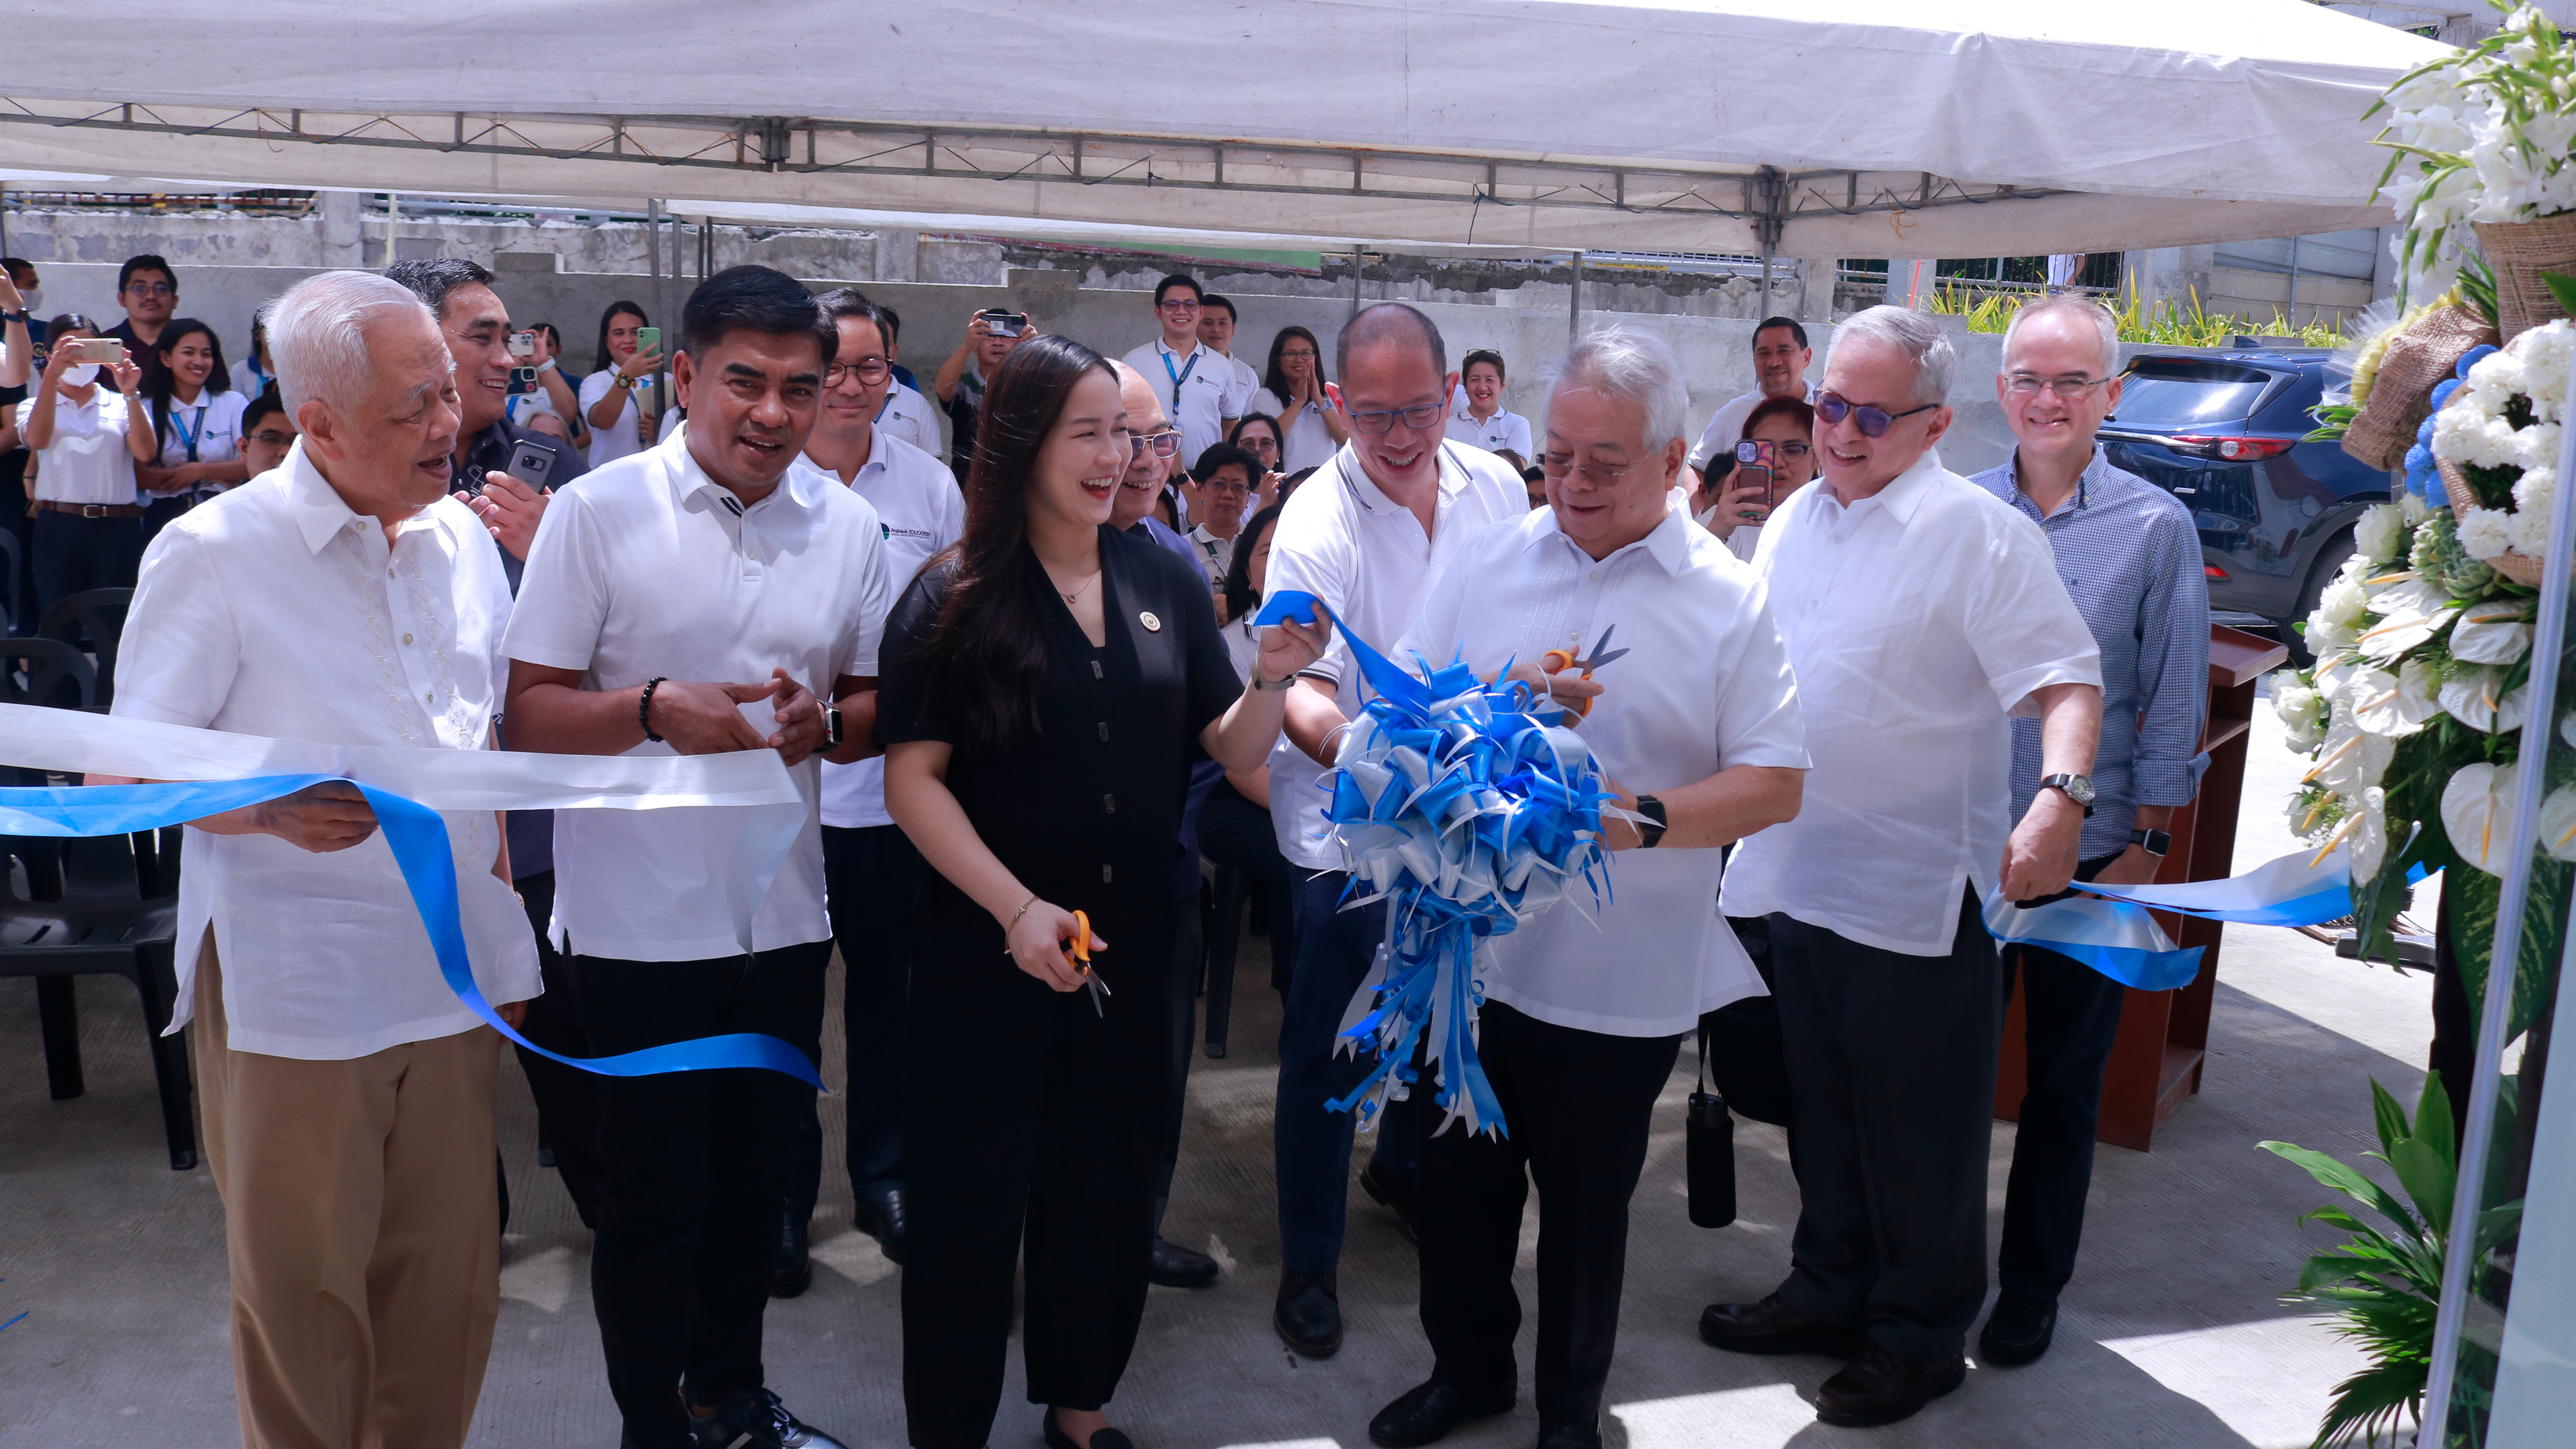 PHINMA Chairman and CEO Ramon R. del Rosario, Jr. at the ribbon cutting ceremony with PHINMA and PHINMA Education executives